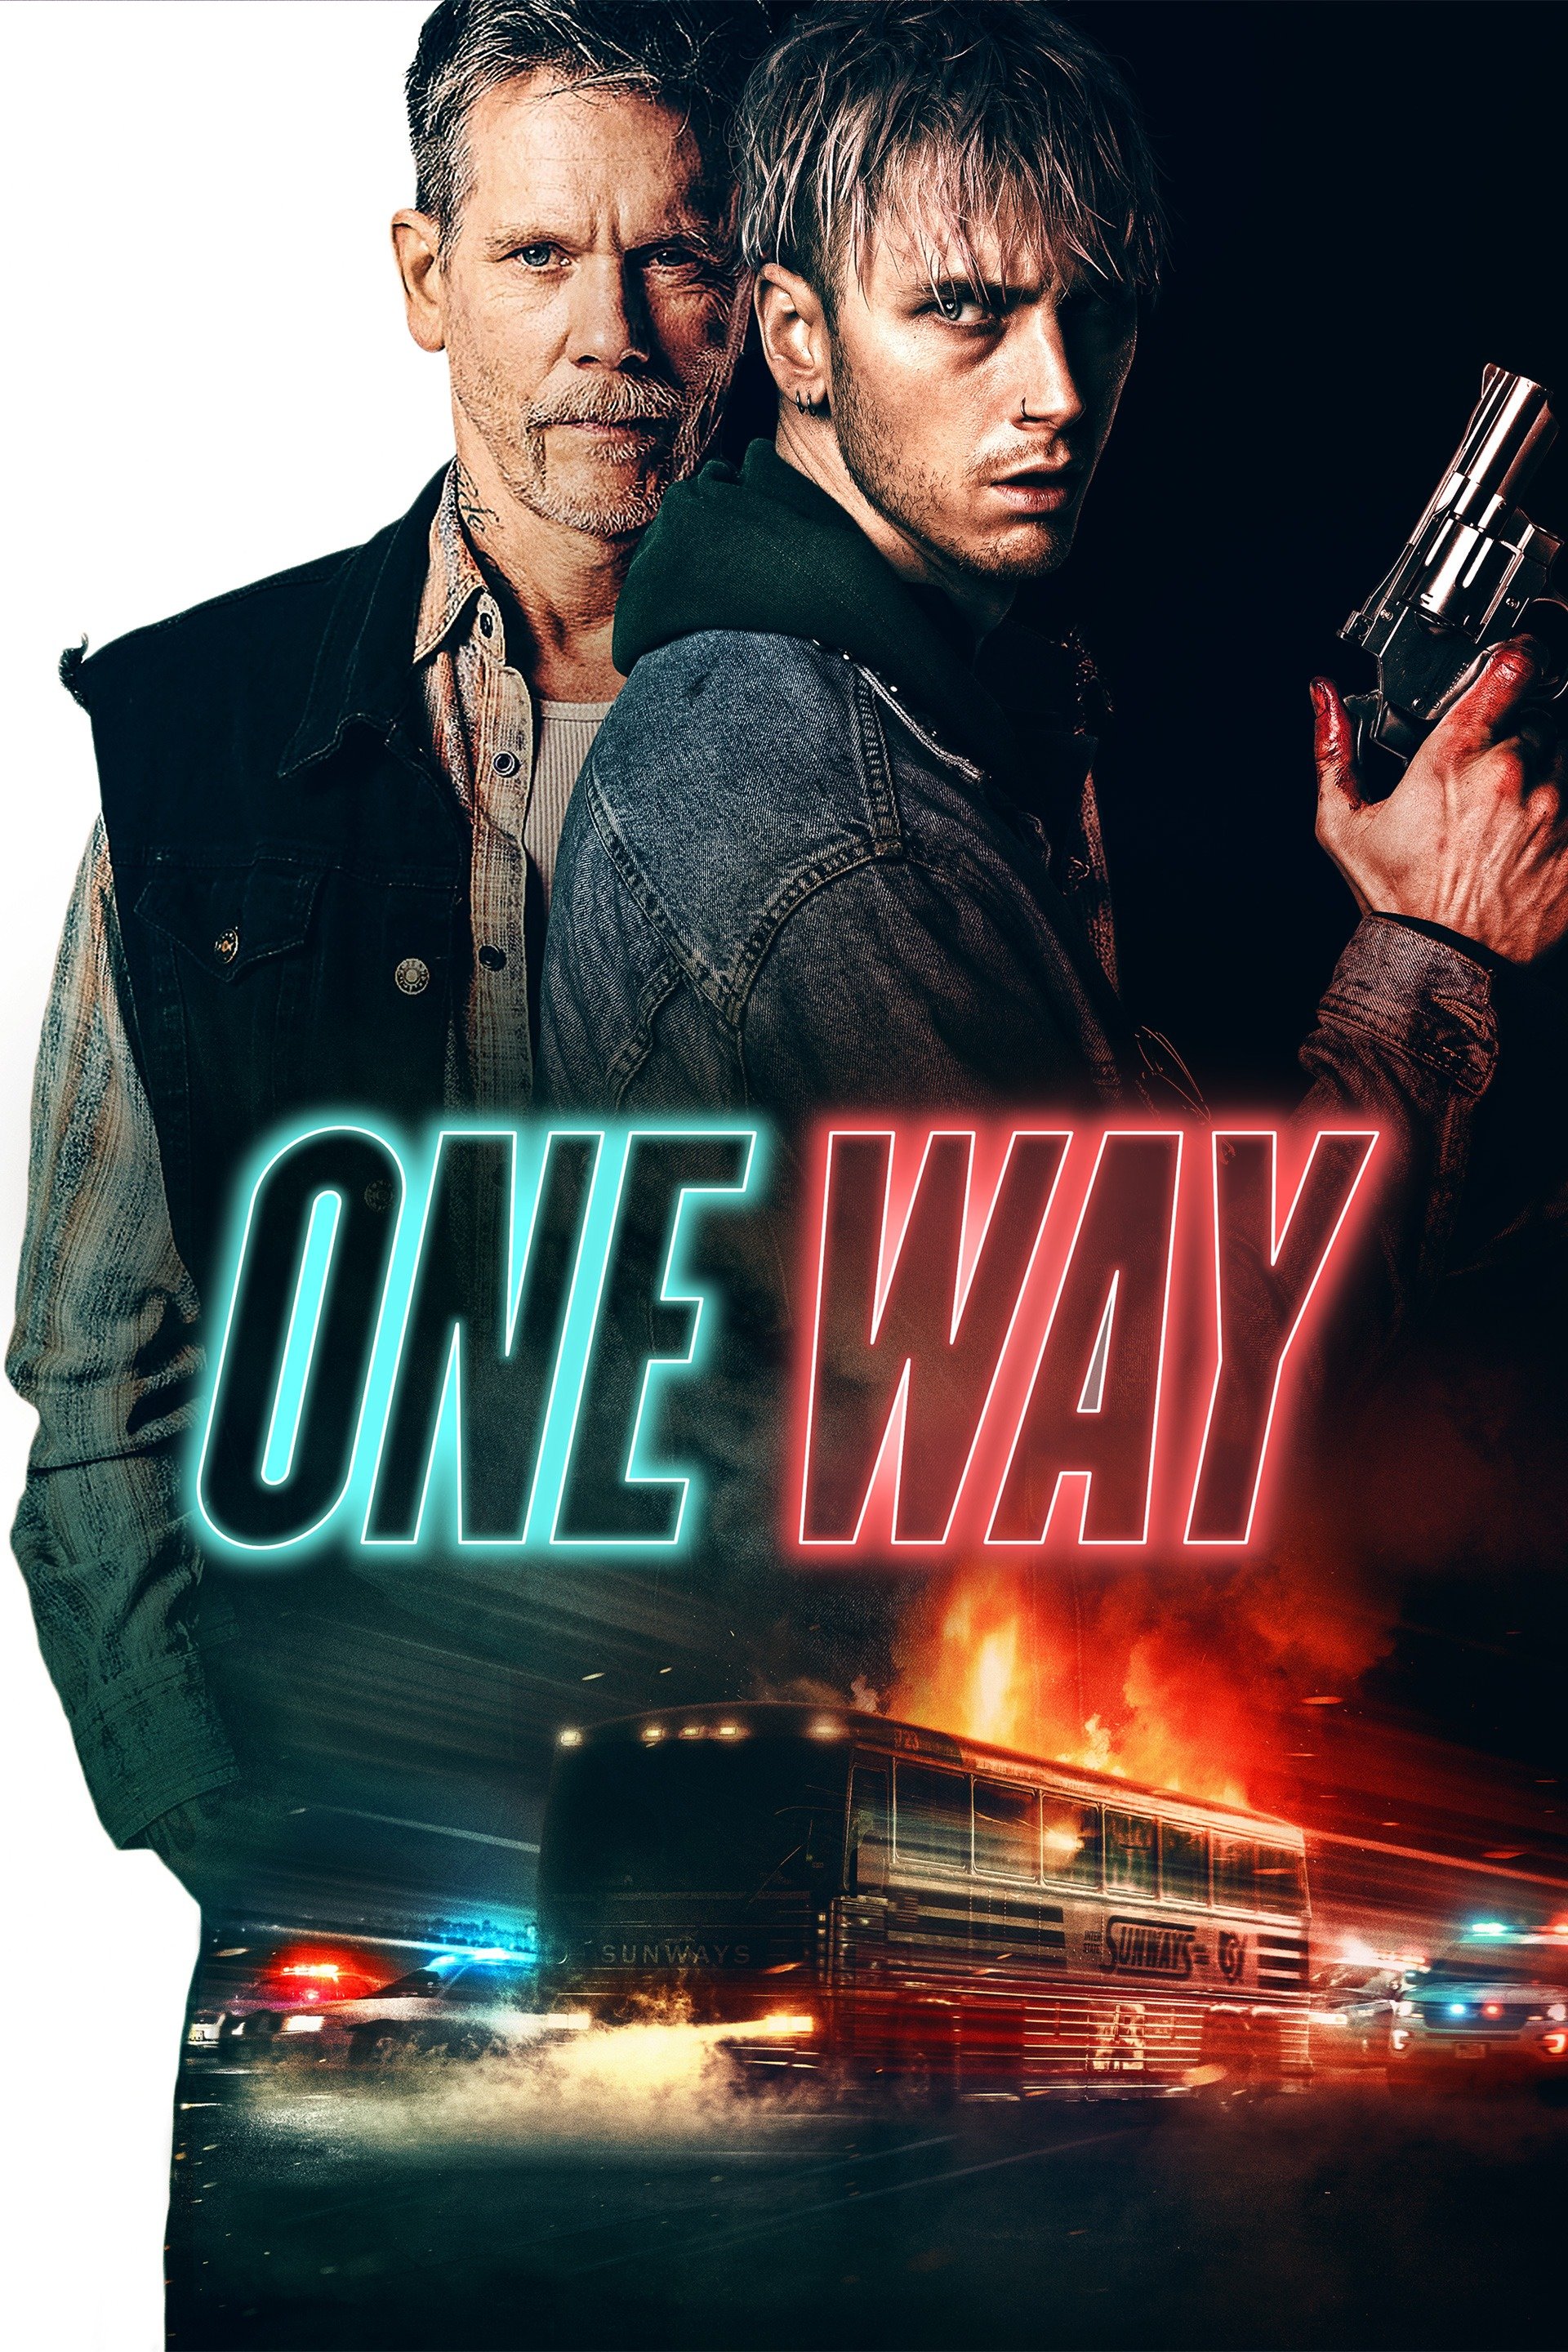 ...Check out just released One Way Pics, Images, Clips, Trailers, Productio...